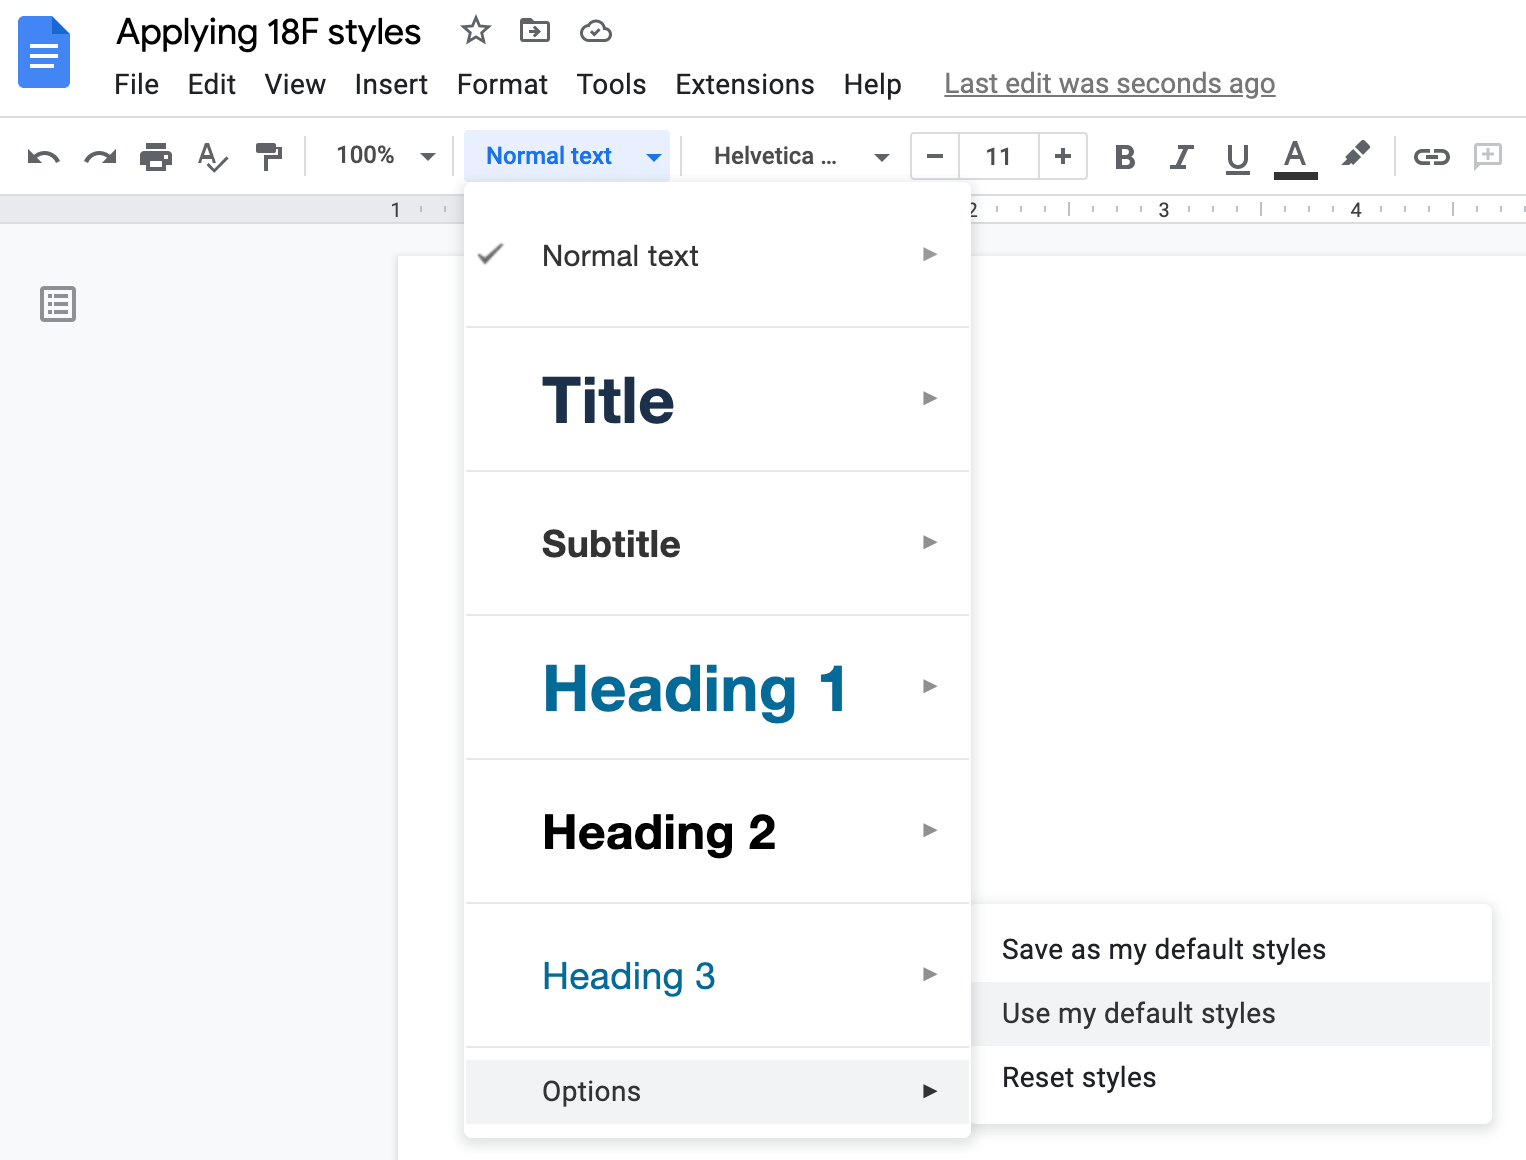 Screenshot showing how to apply default styles to an existing Google Doc